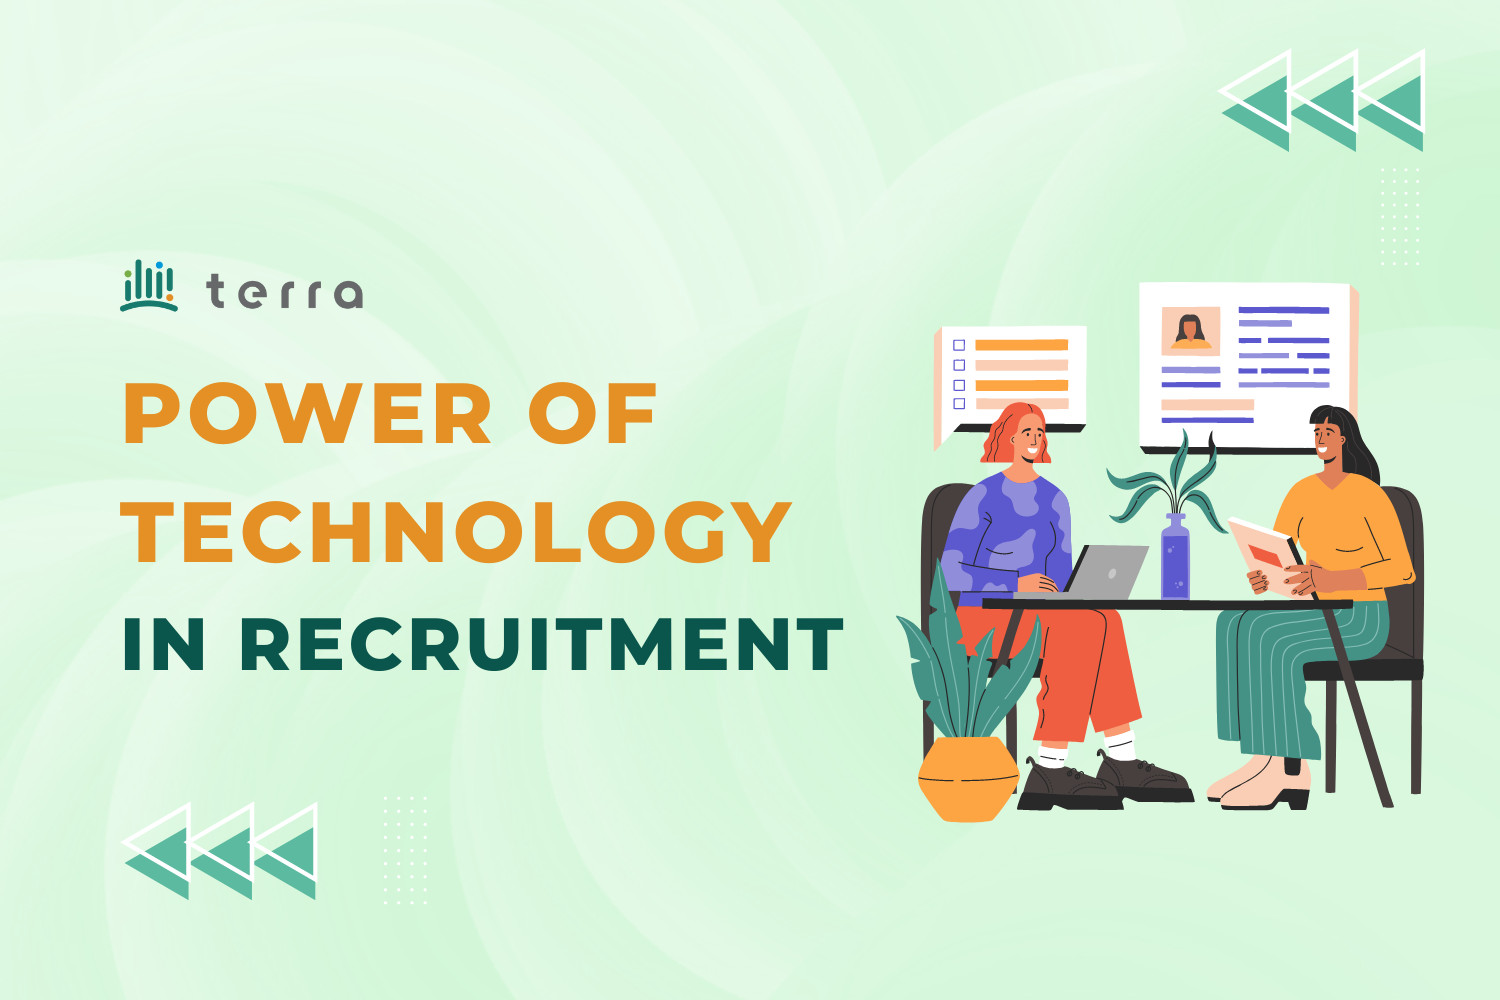 Power of technology in recruitment